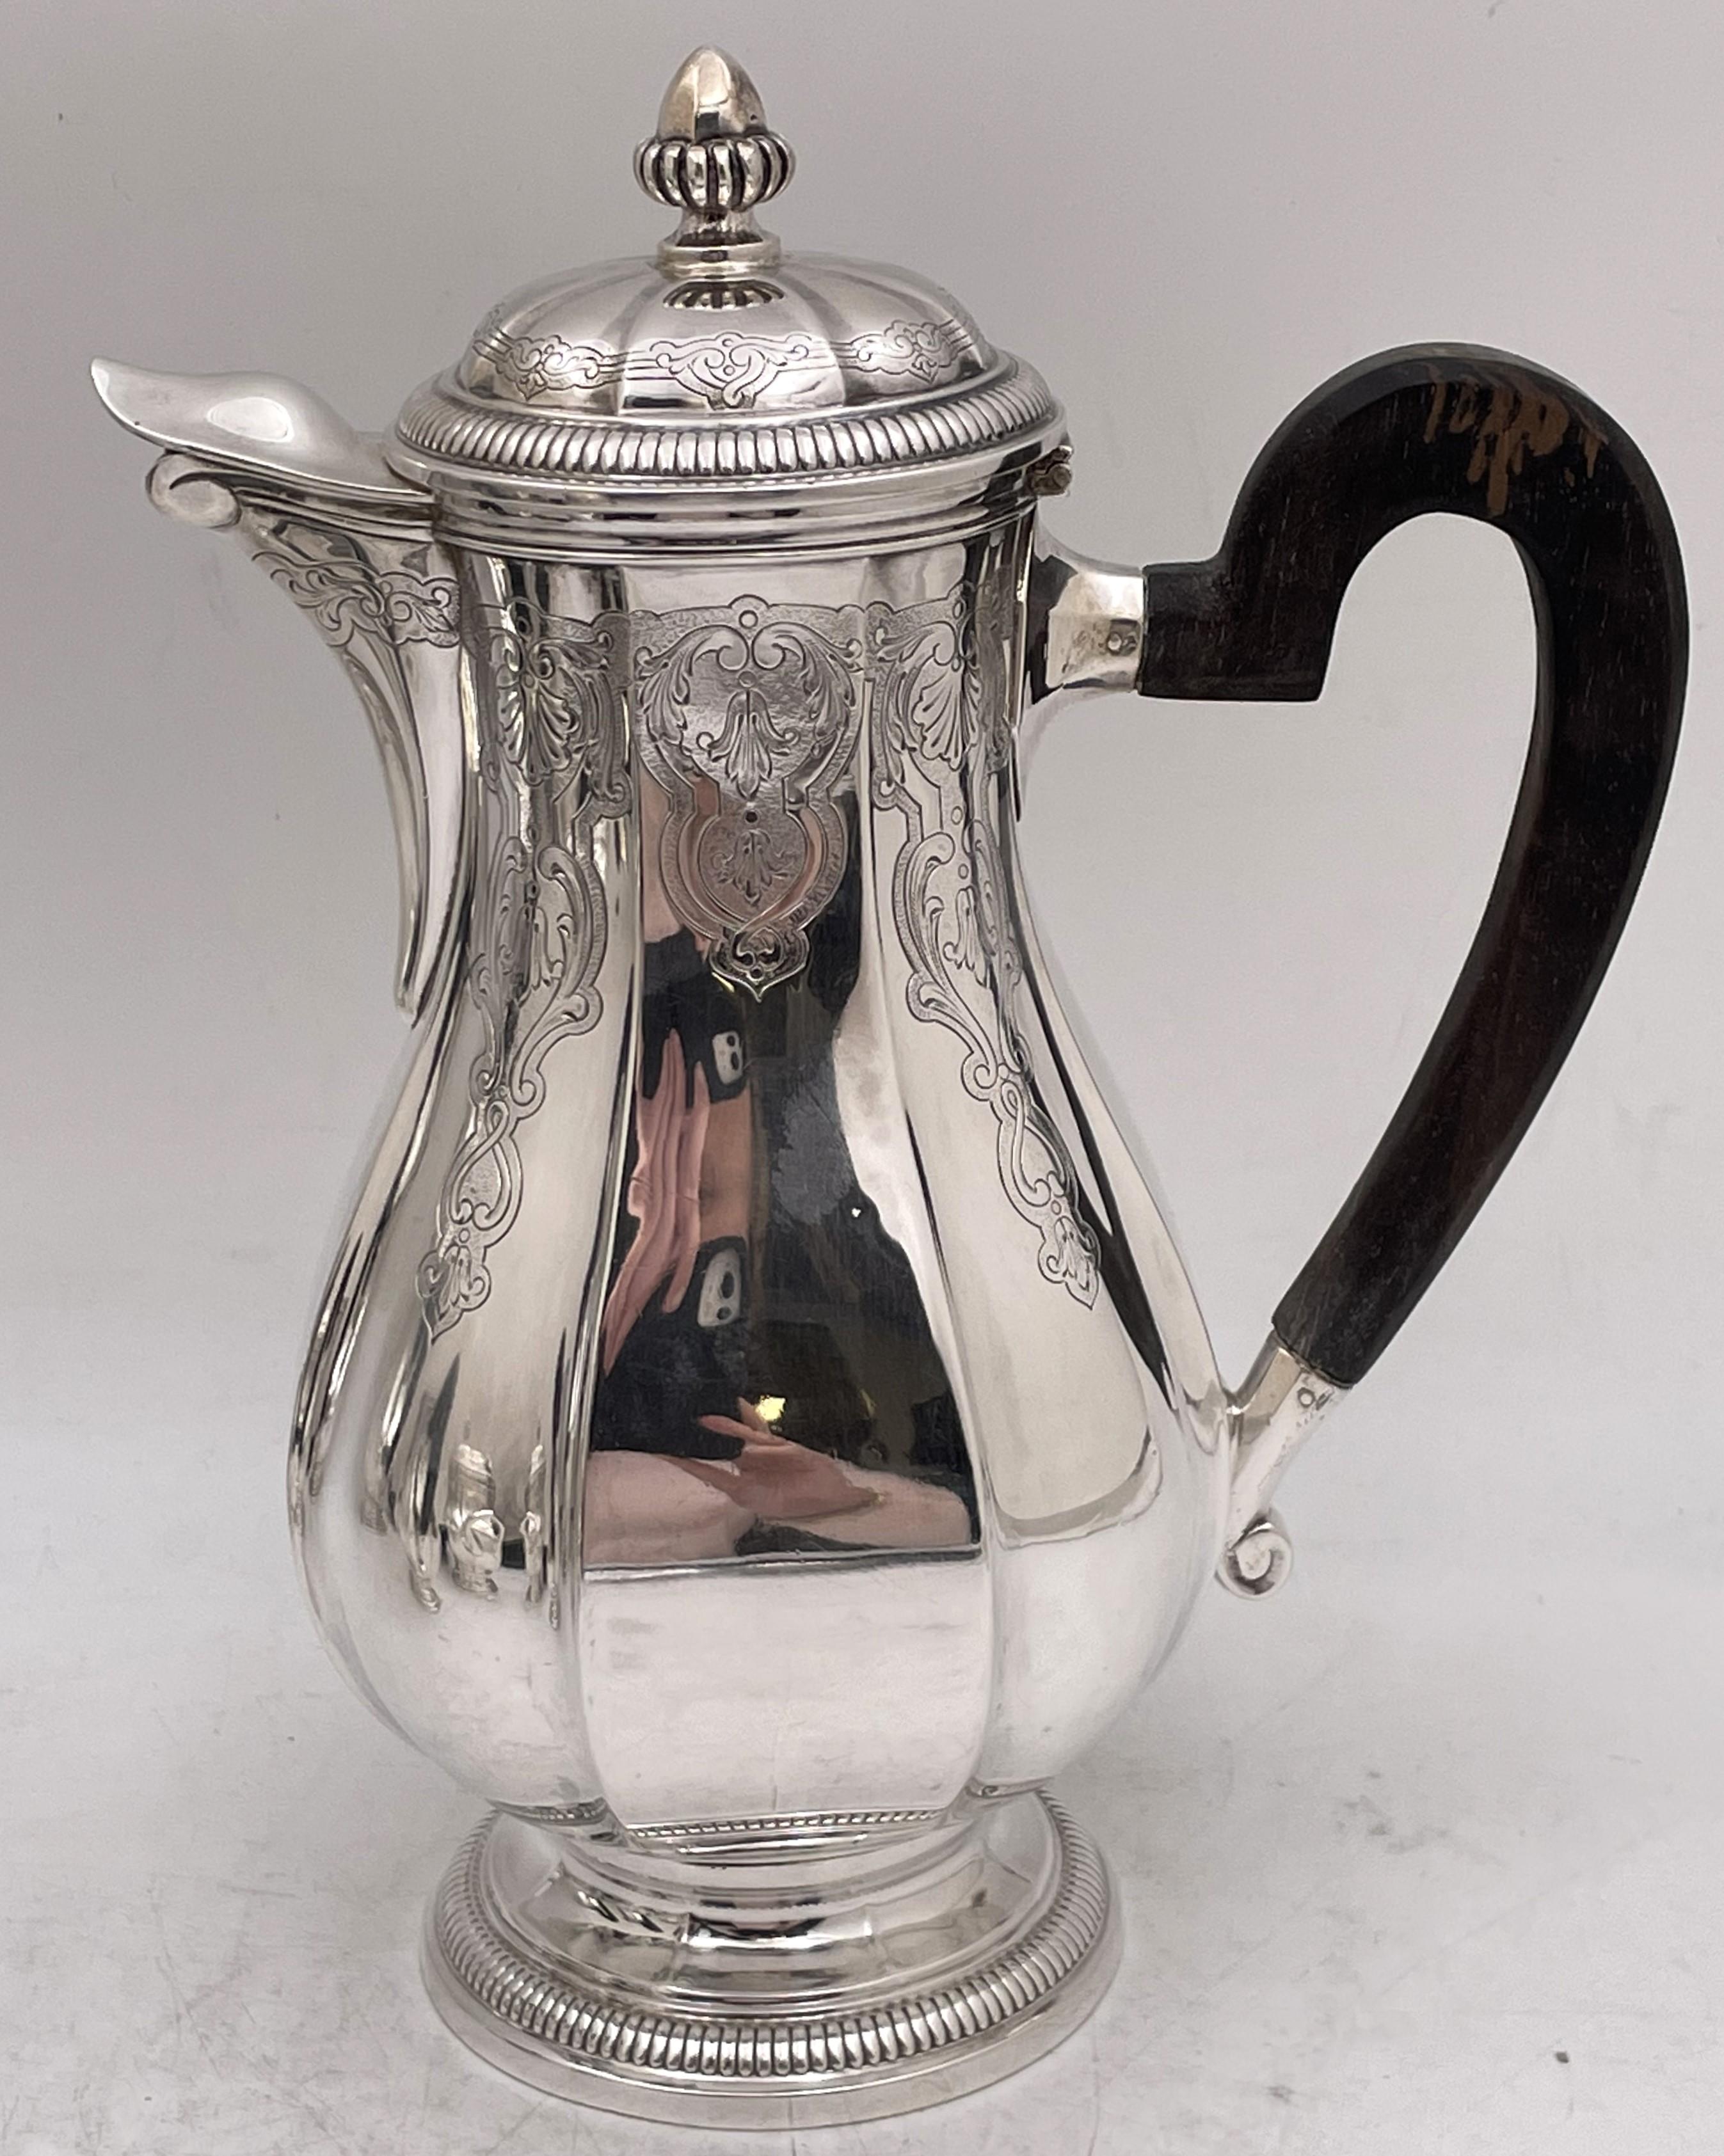 French 0.950 (higher purity than sterling) silver 4-piece tea and coffee set in Art Deco style from the early 20th century, finely engraved with elegant, geometric motifs, with wood handles, consisting of:

- a coffee pot measuring 9 3/4'' in height